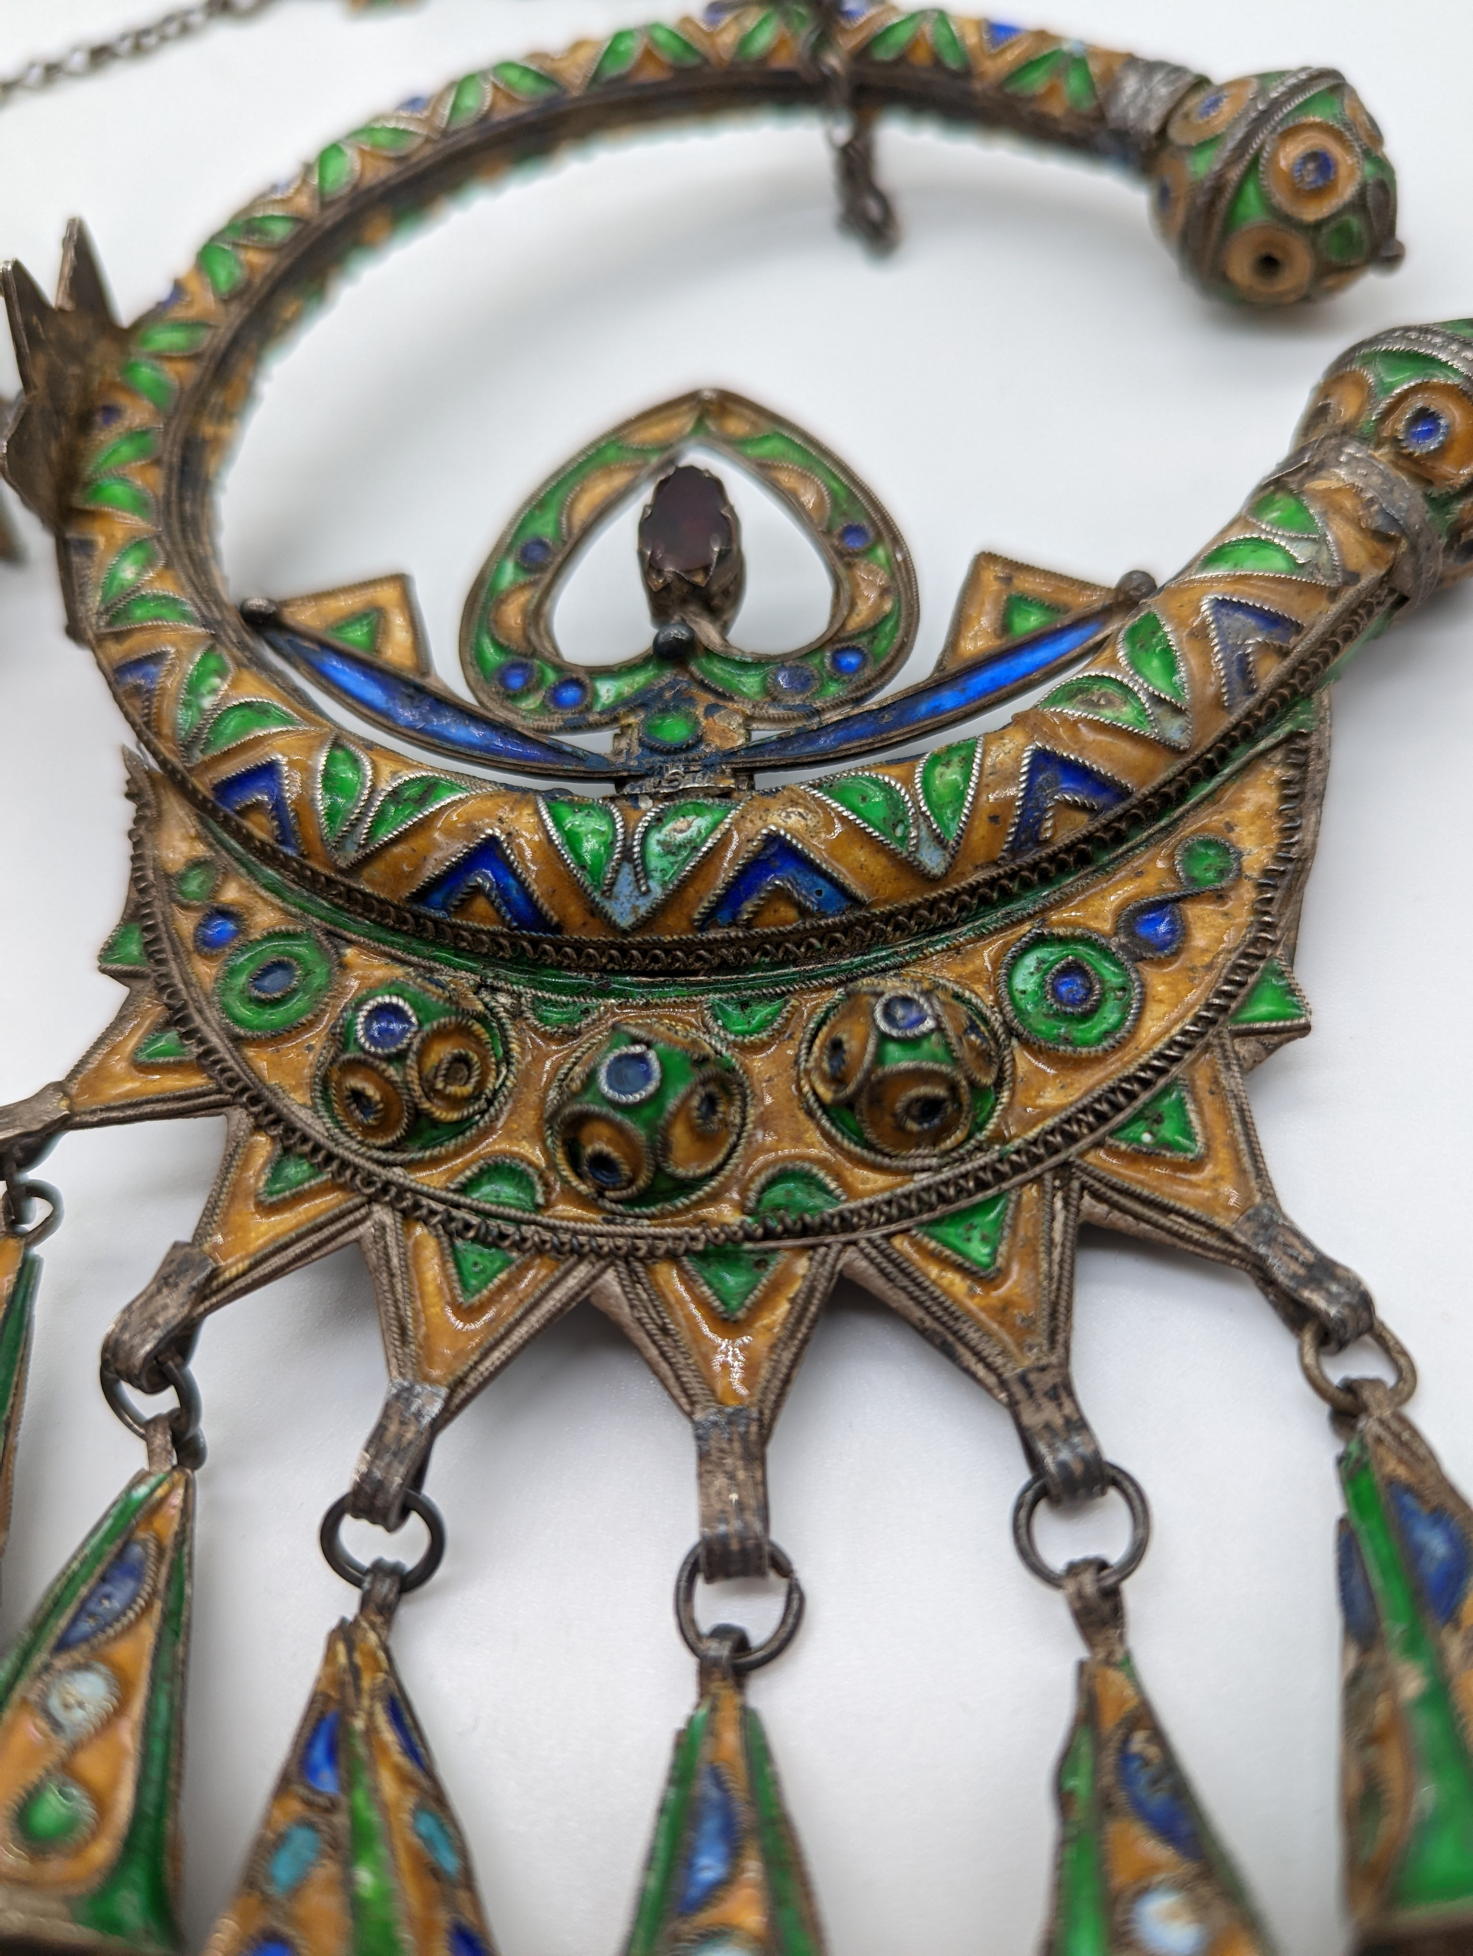 A pair of Moroccan Berber silver headdresses, enamelled with ornaments and chains - Image 6 of 8